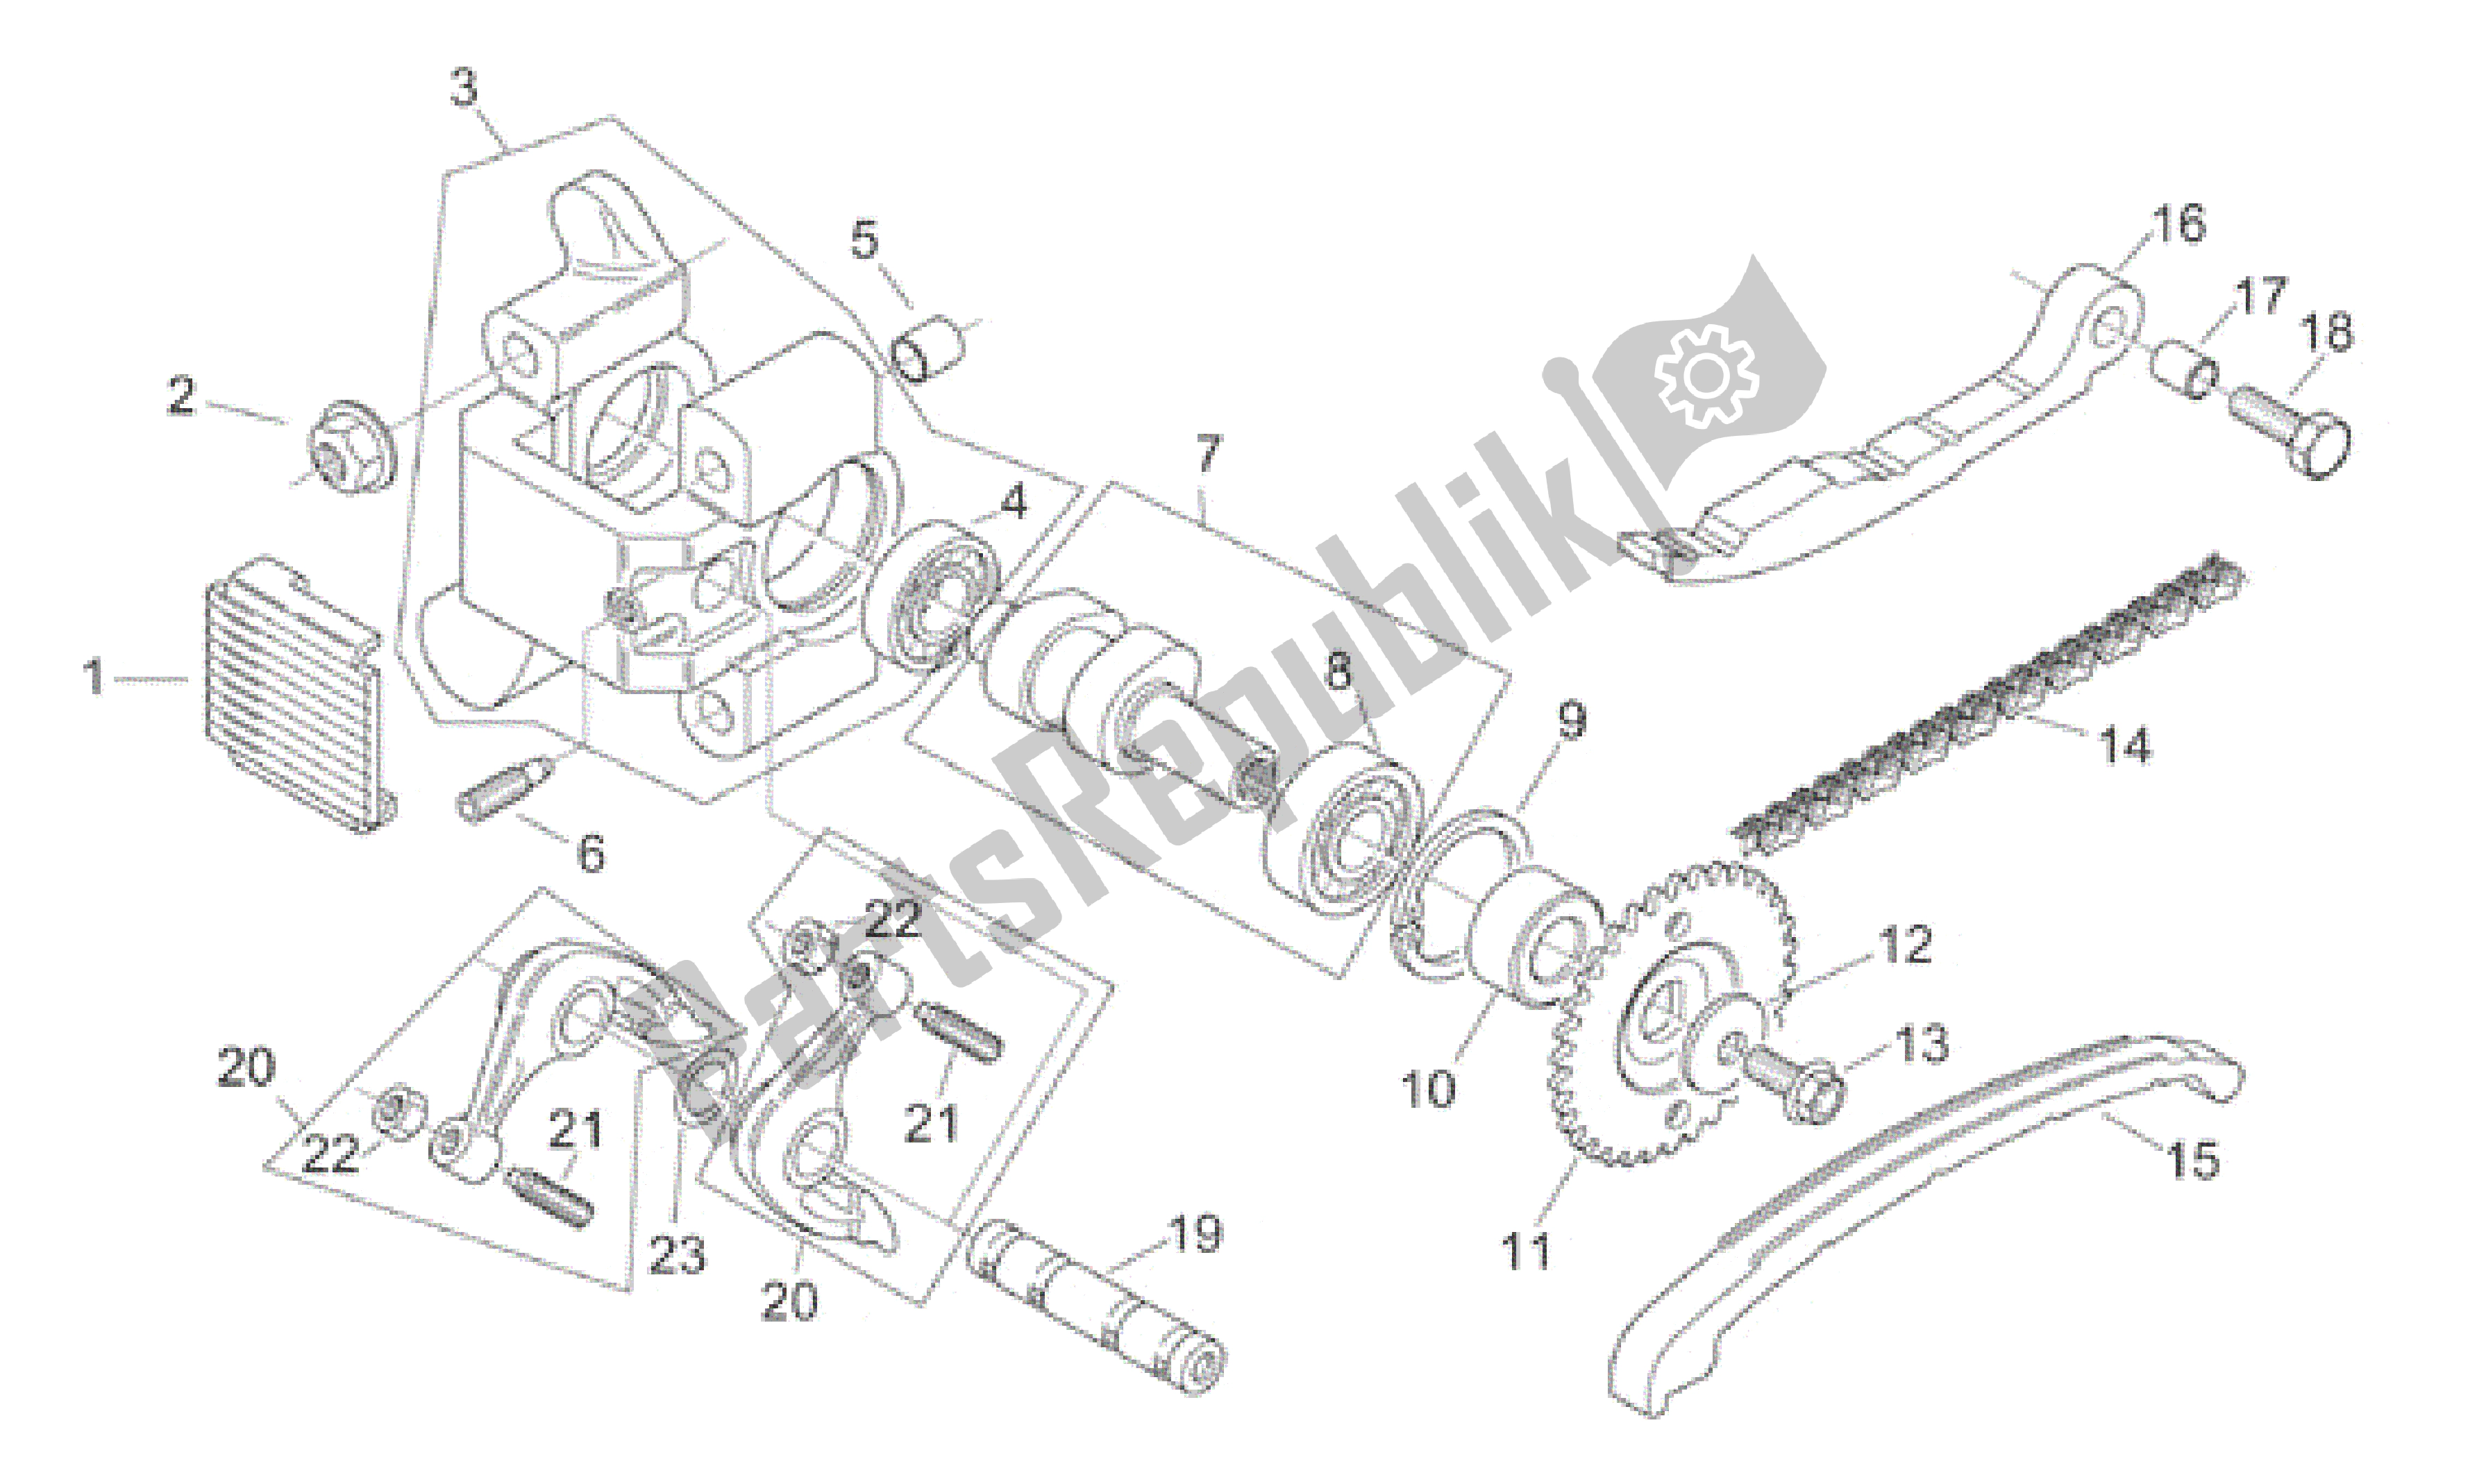 All parts for the Timing System of the Aprilia Habana 125 1999 - 2001